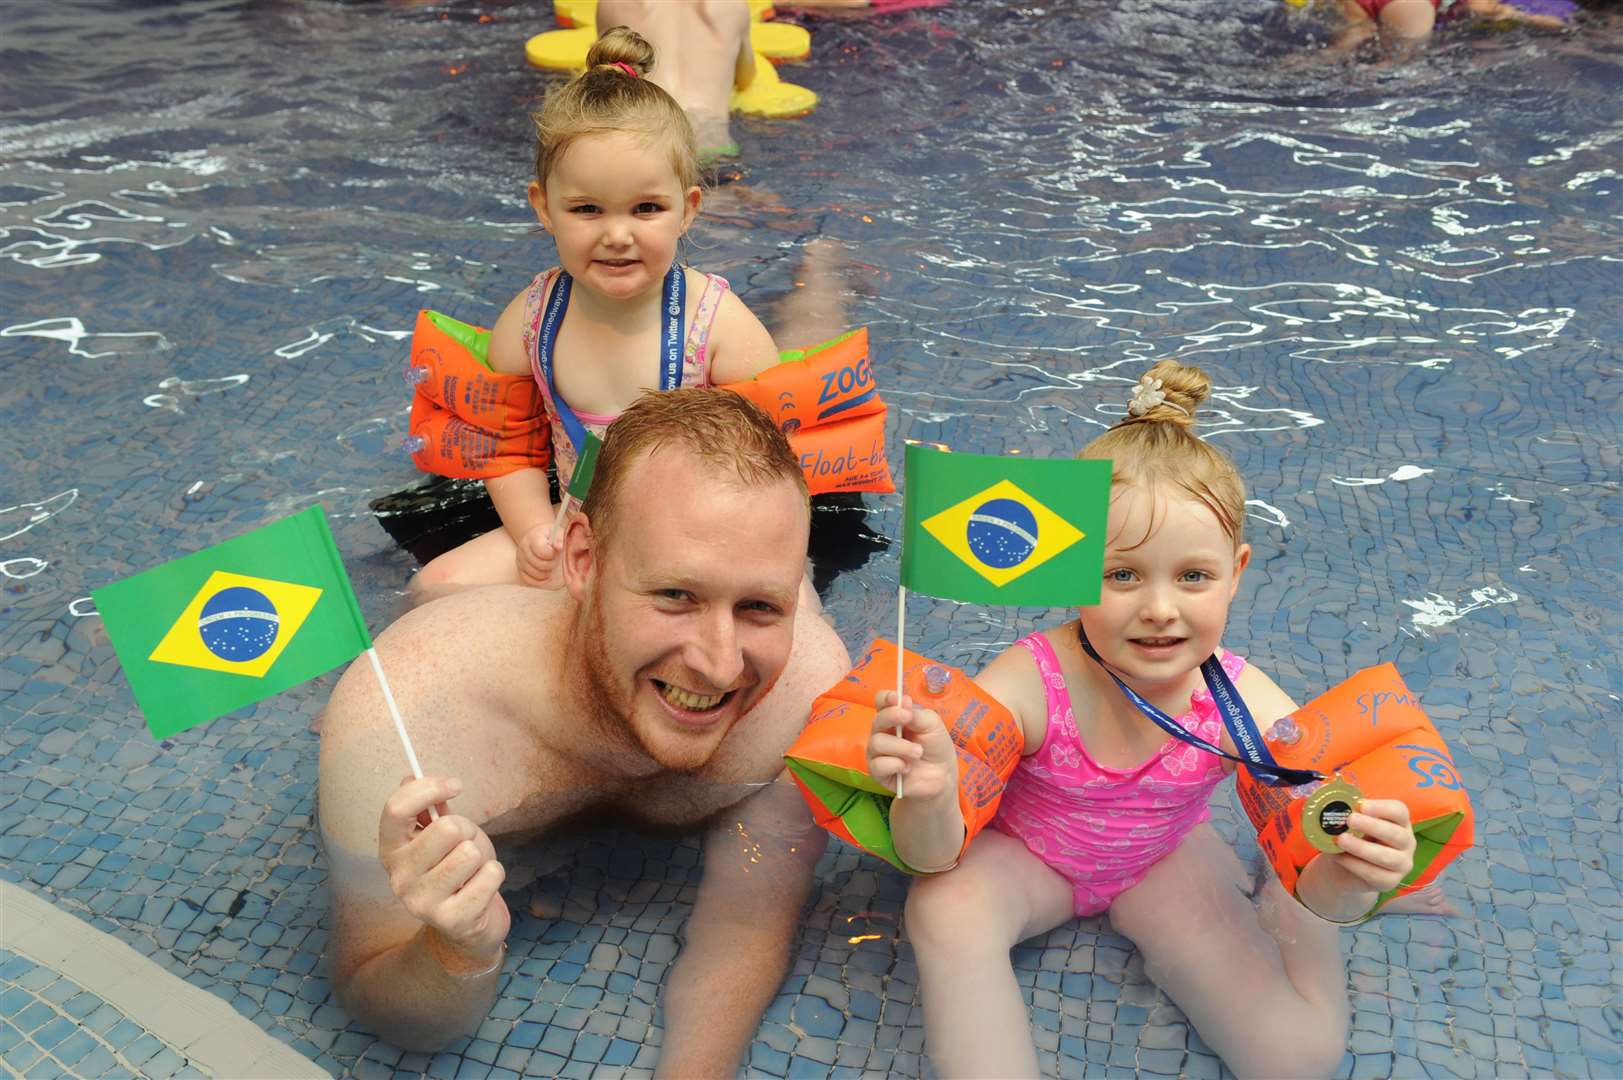 Rio Olympic themed family fun day. Nick Morris with Ellie and Katie aged 5 and 3